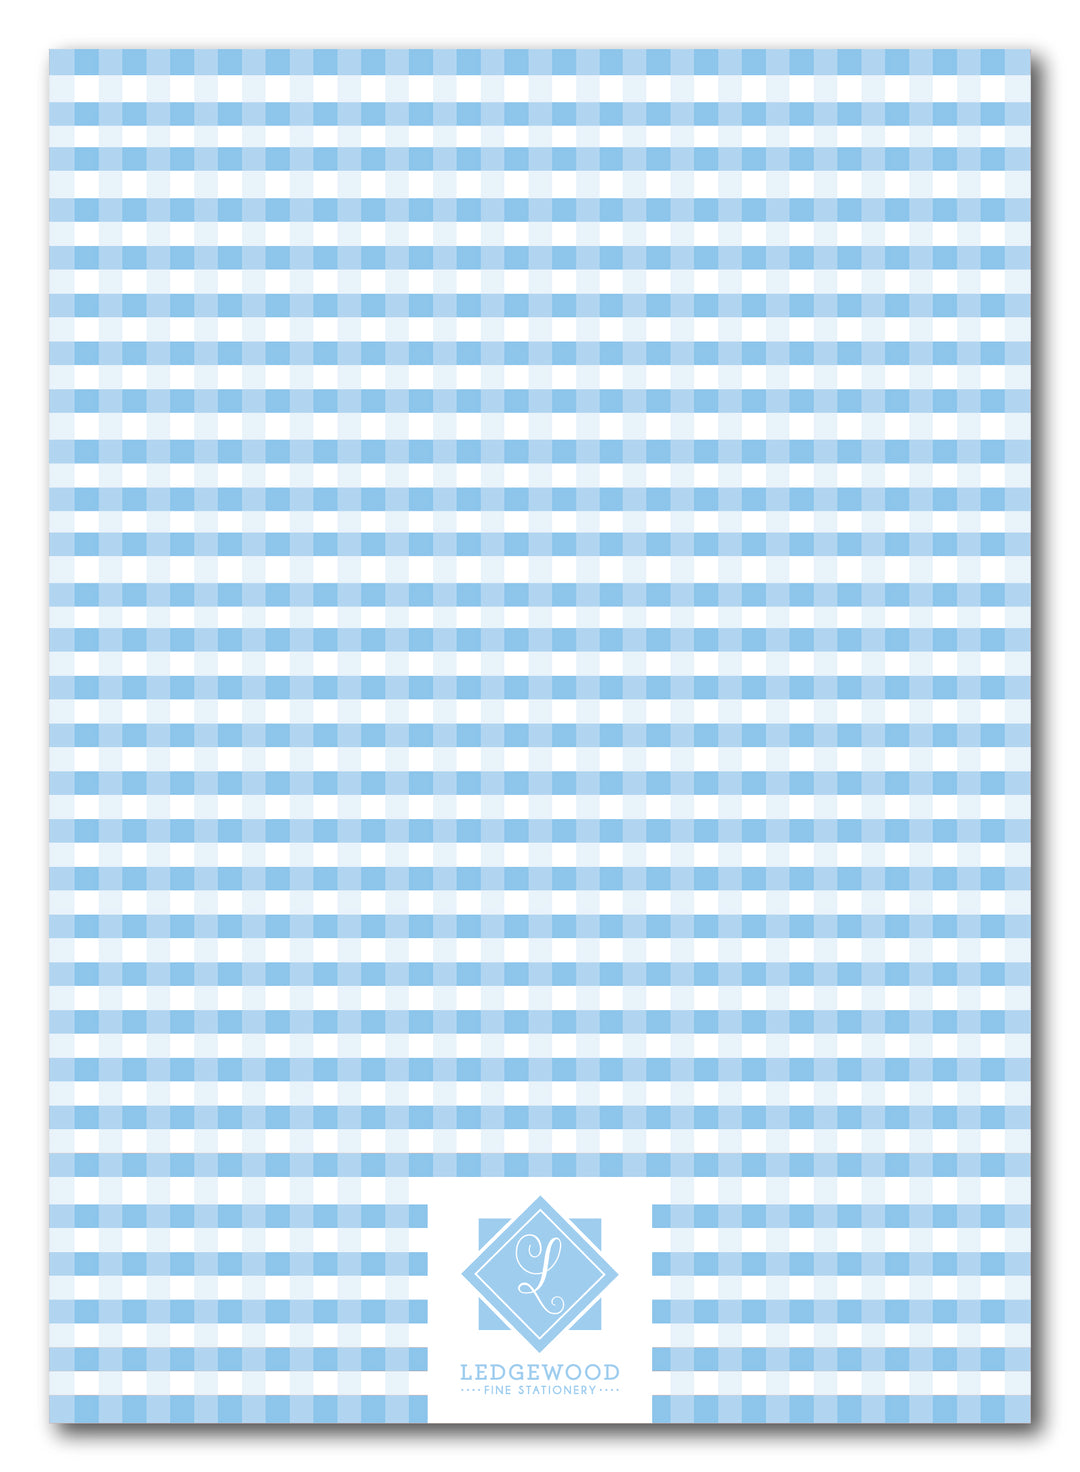 The Blue Gingham II Birthday Party Invitation